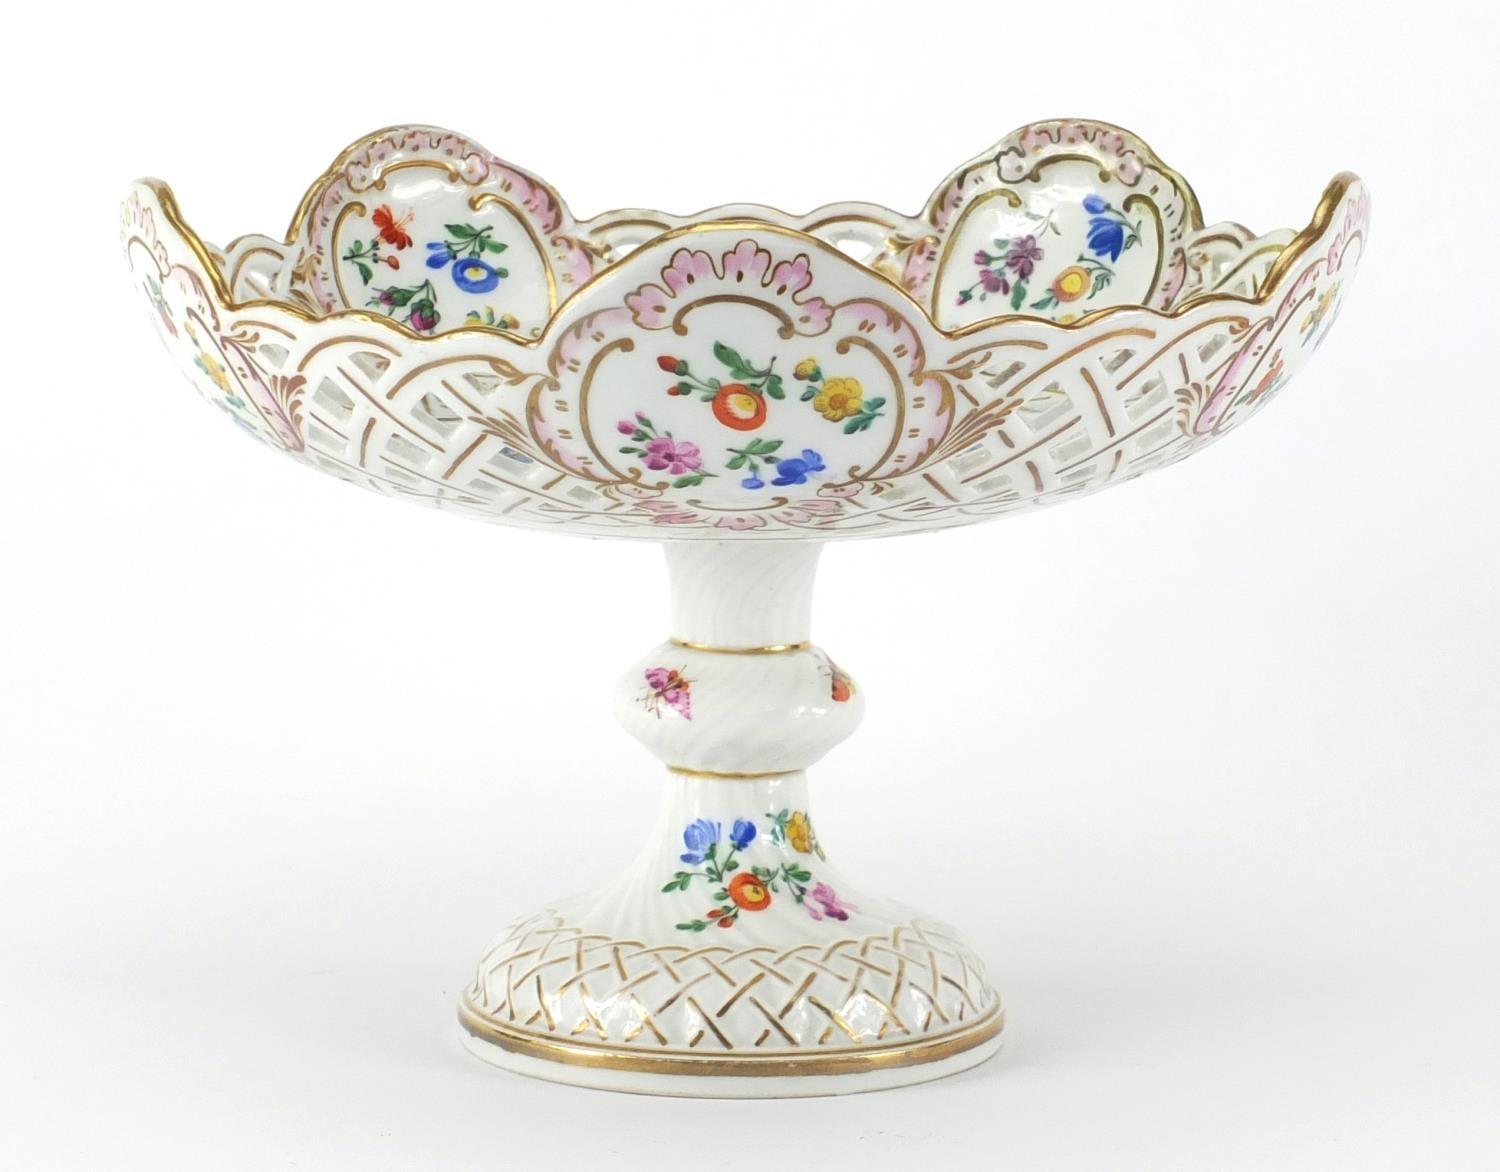 19th century Meissen porcelain tazza having a pierced rim, hand painted with stylised flowers, - Image 2 of 6